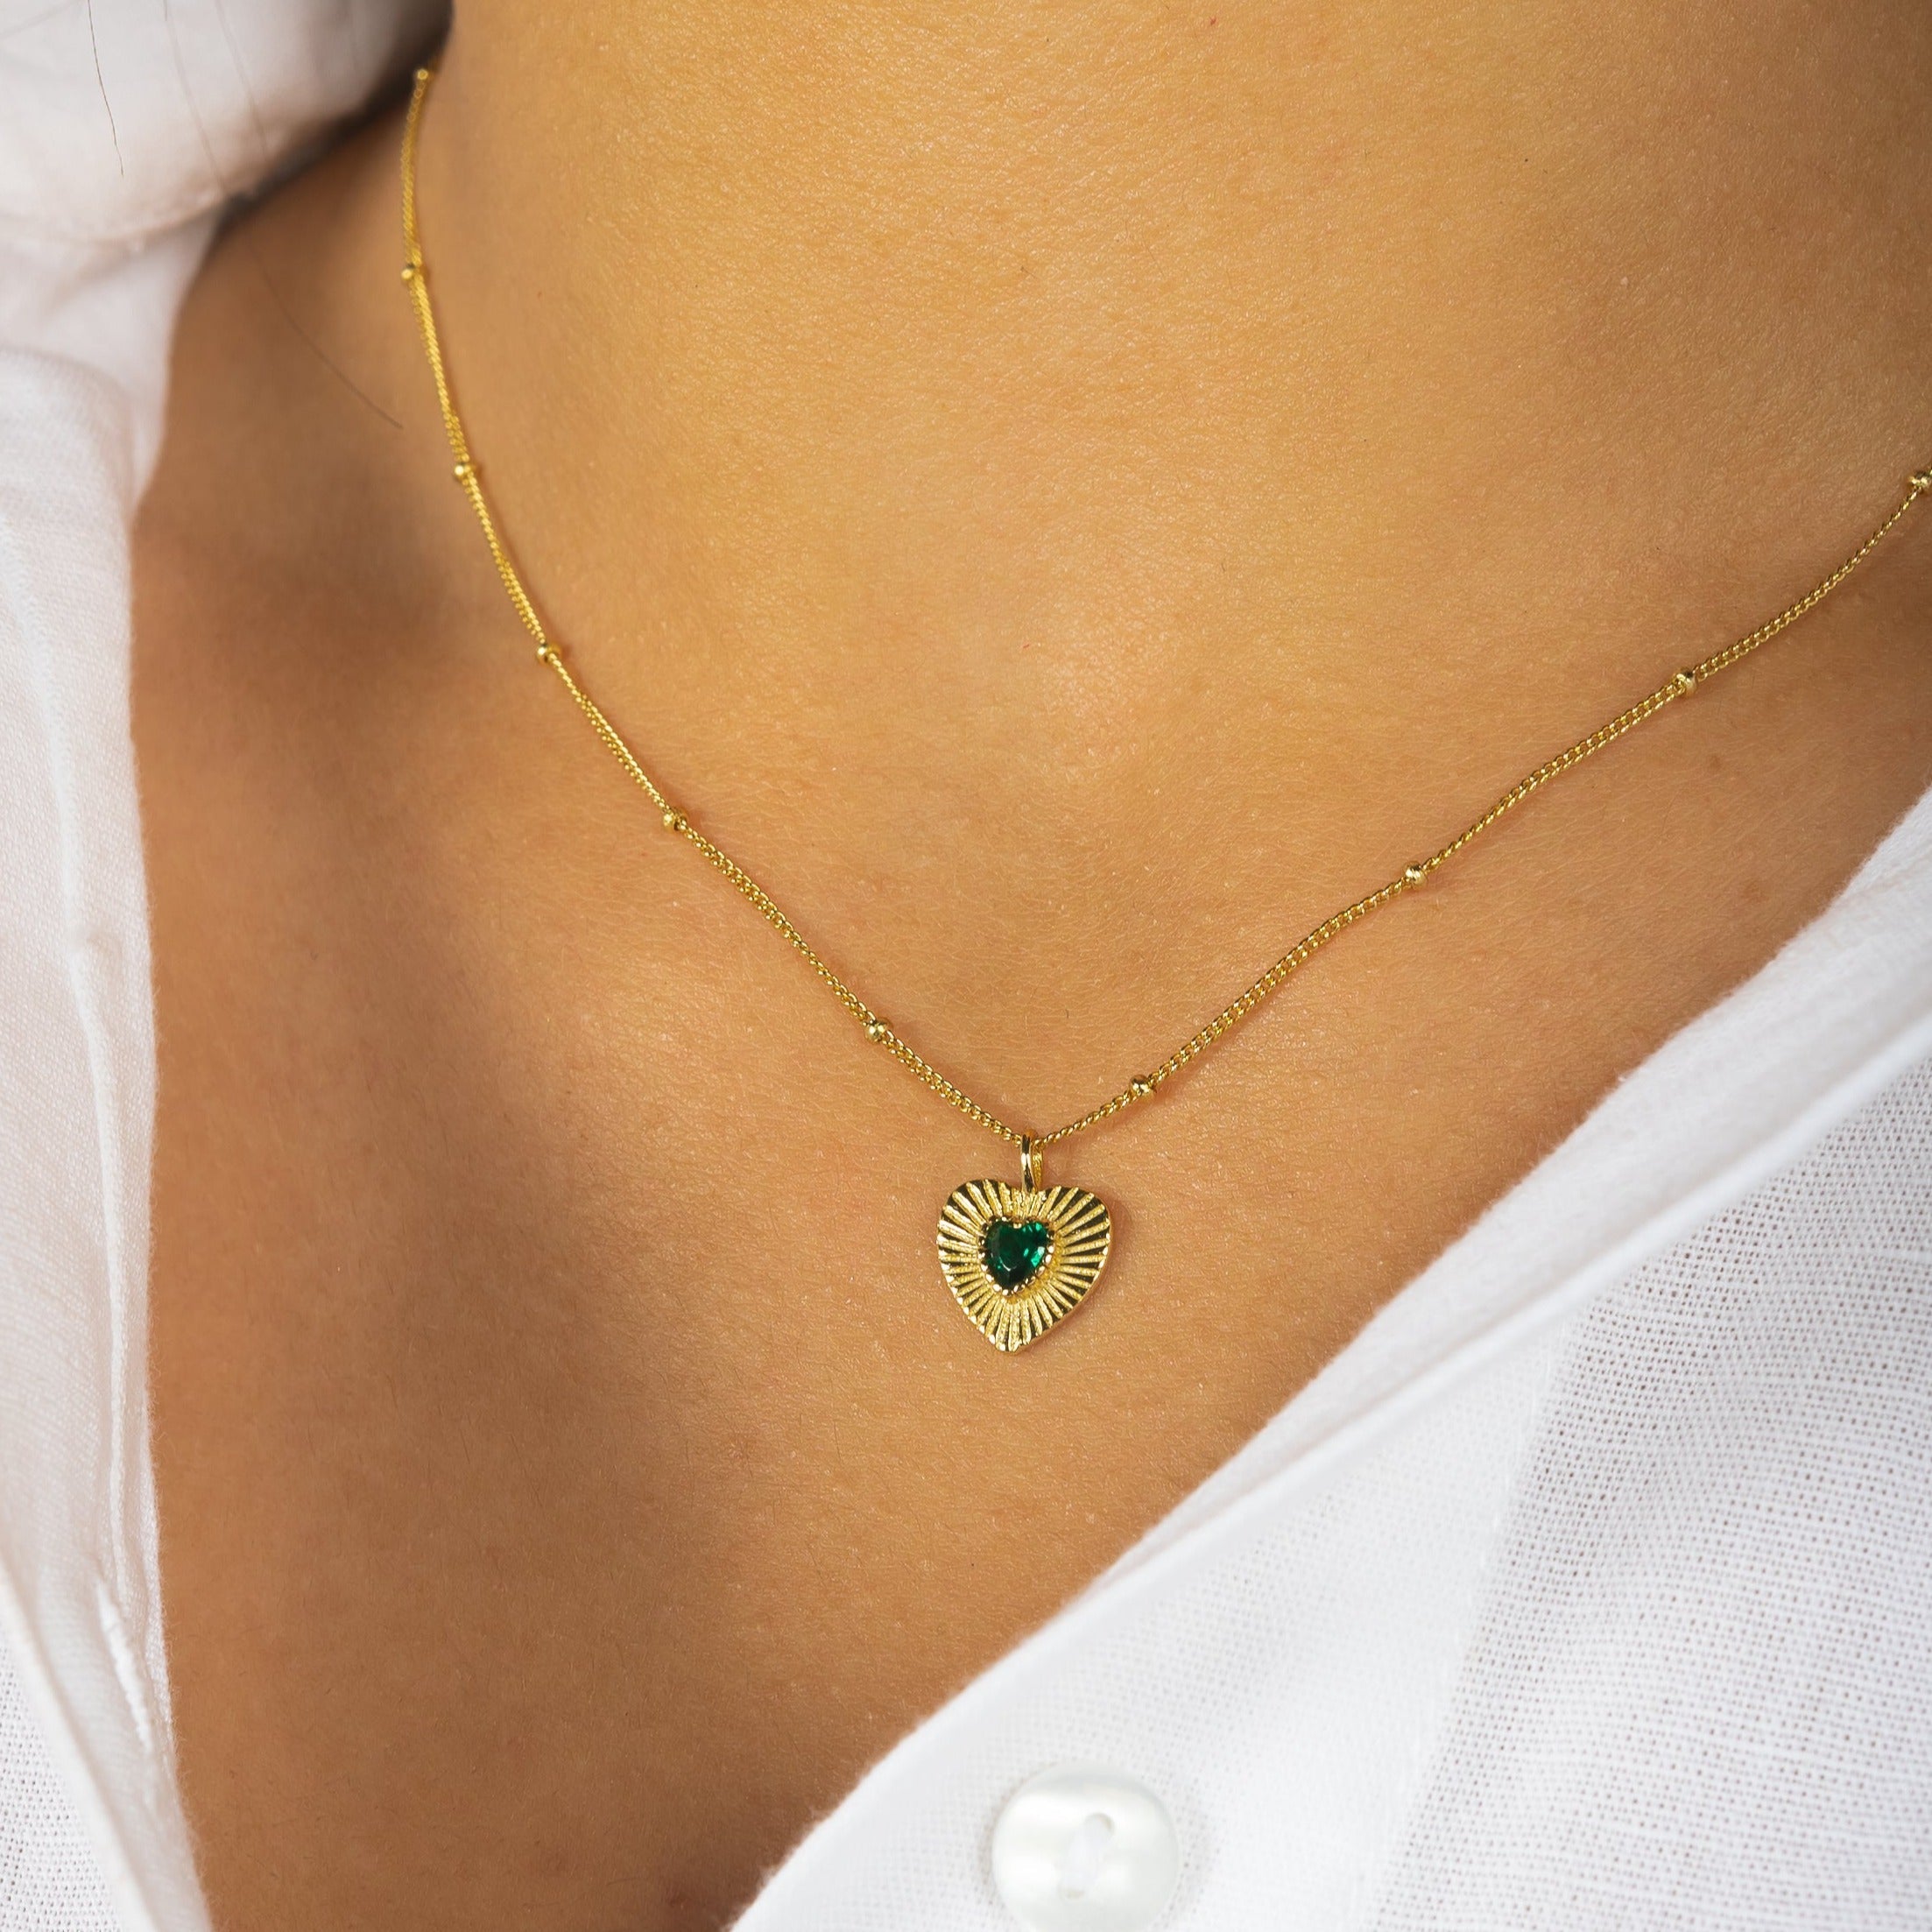 Green Heart Pendant Necklace - Gold